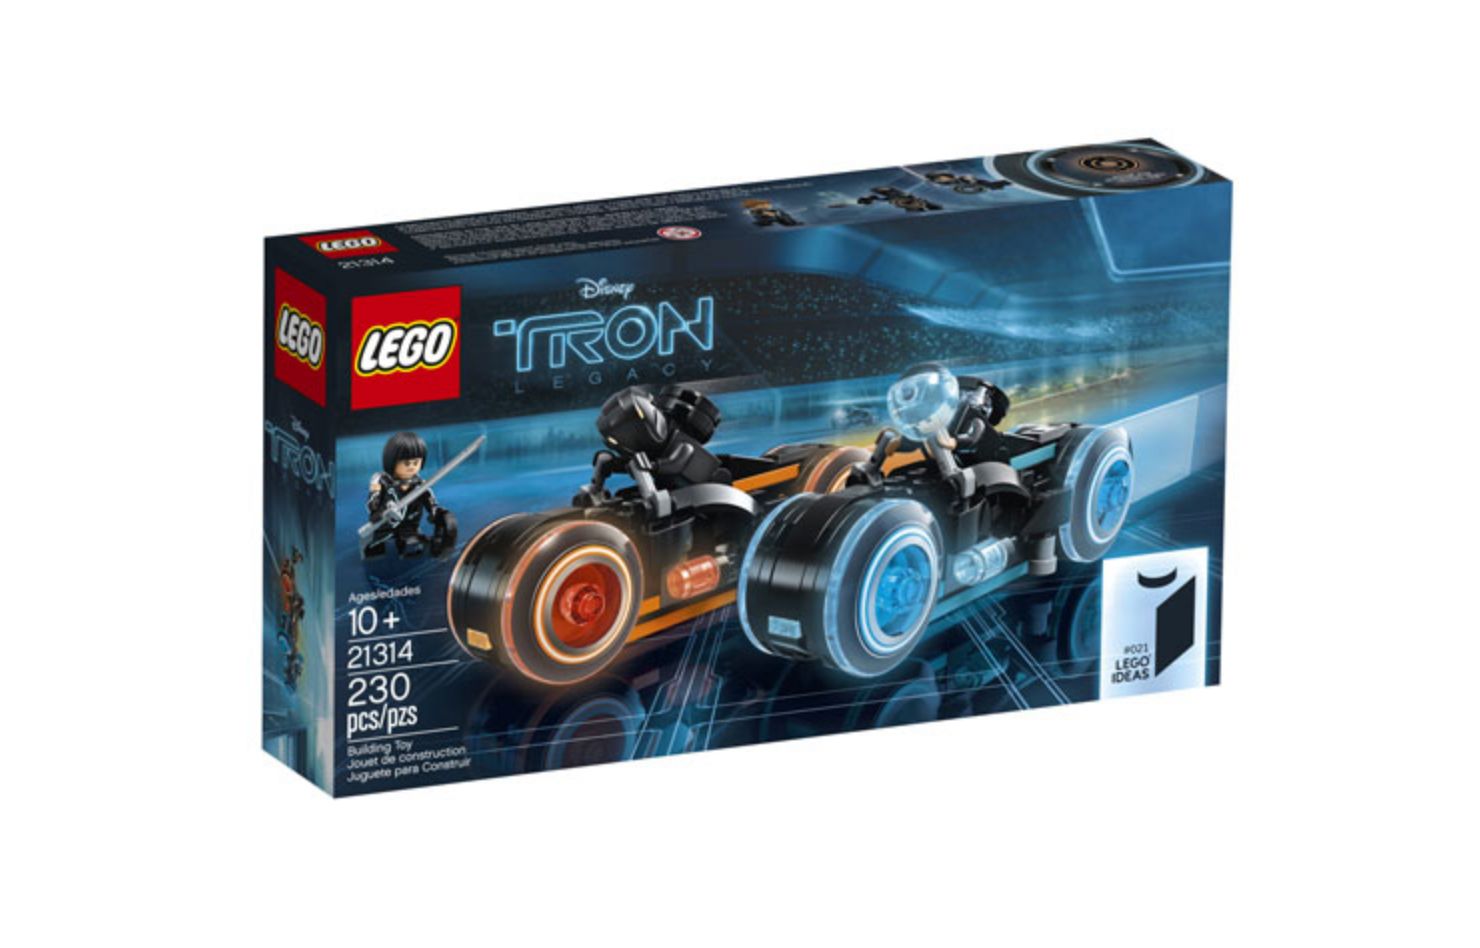 Hard to find Lego Tron